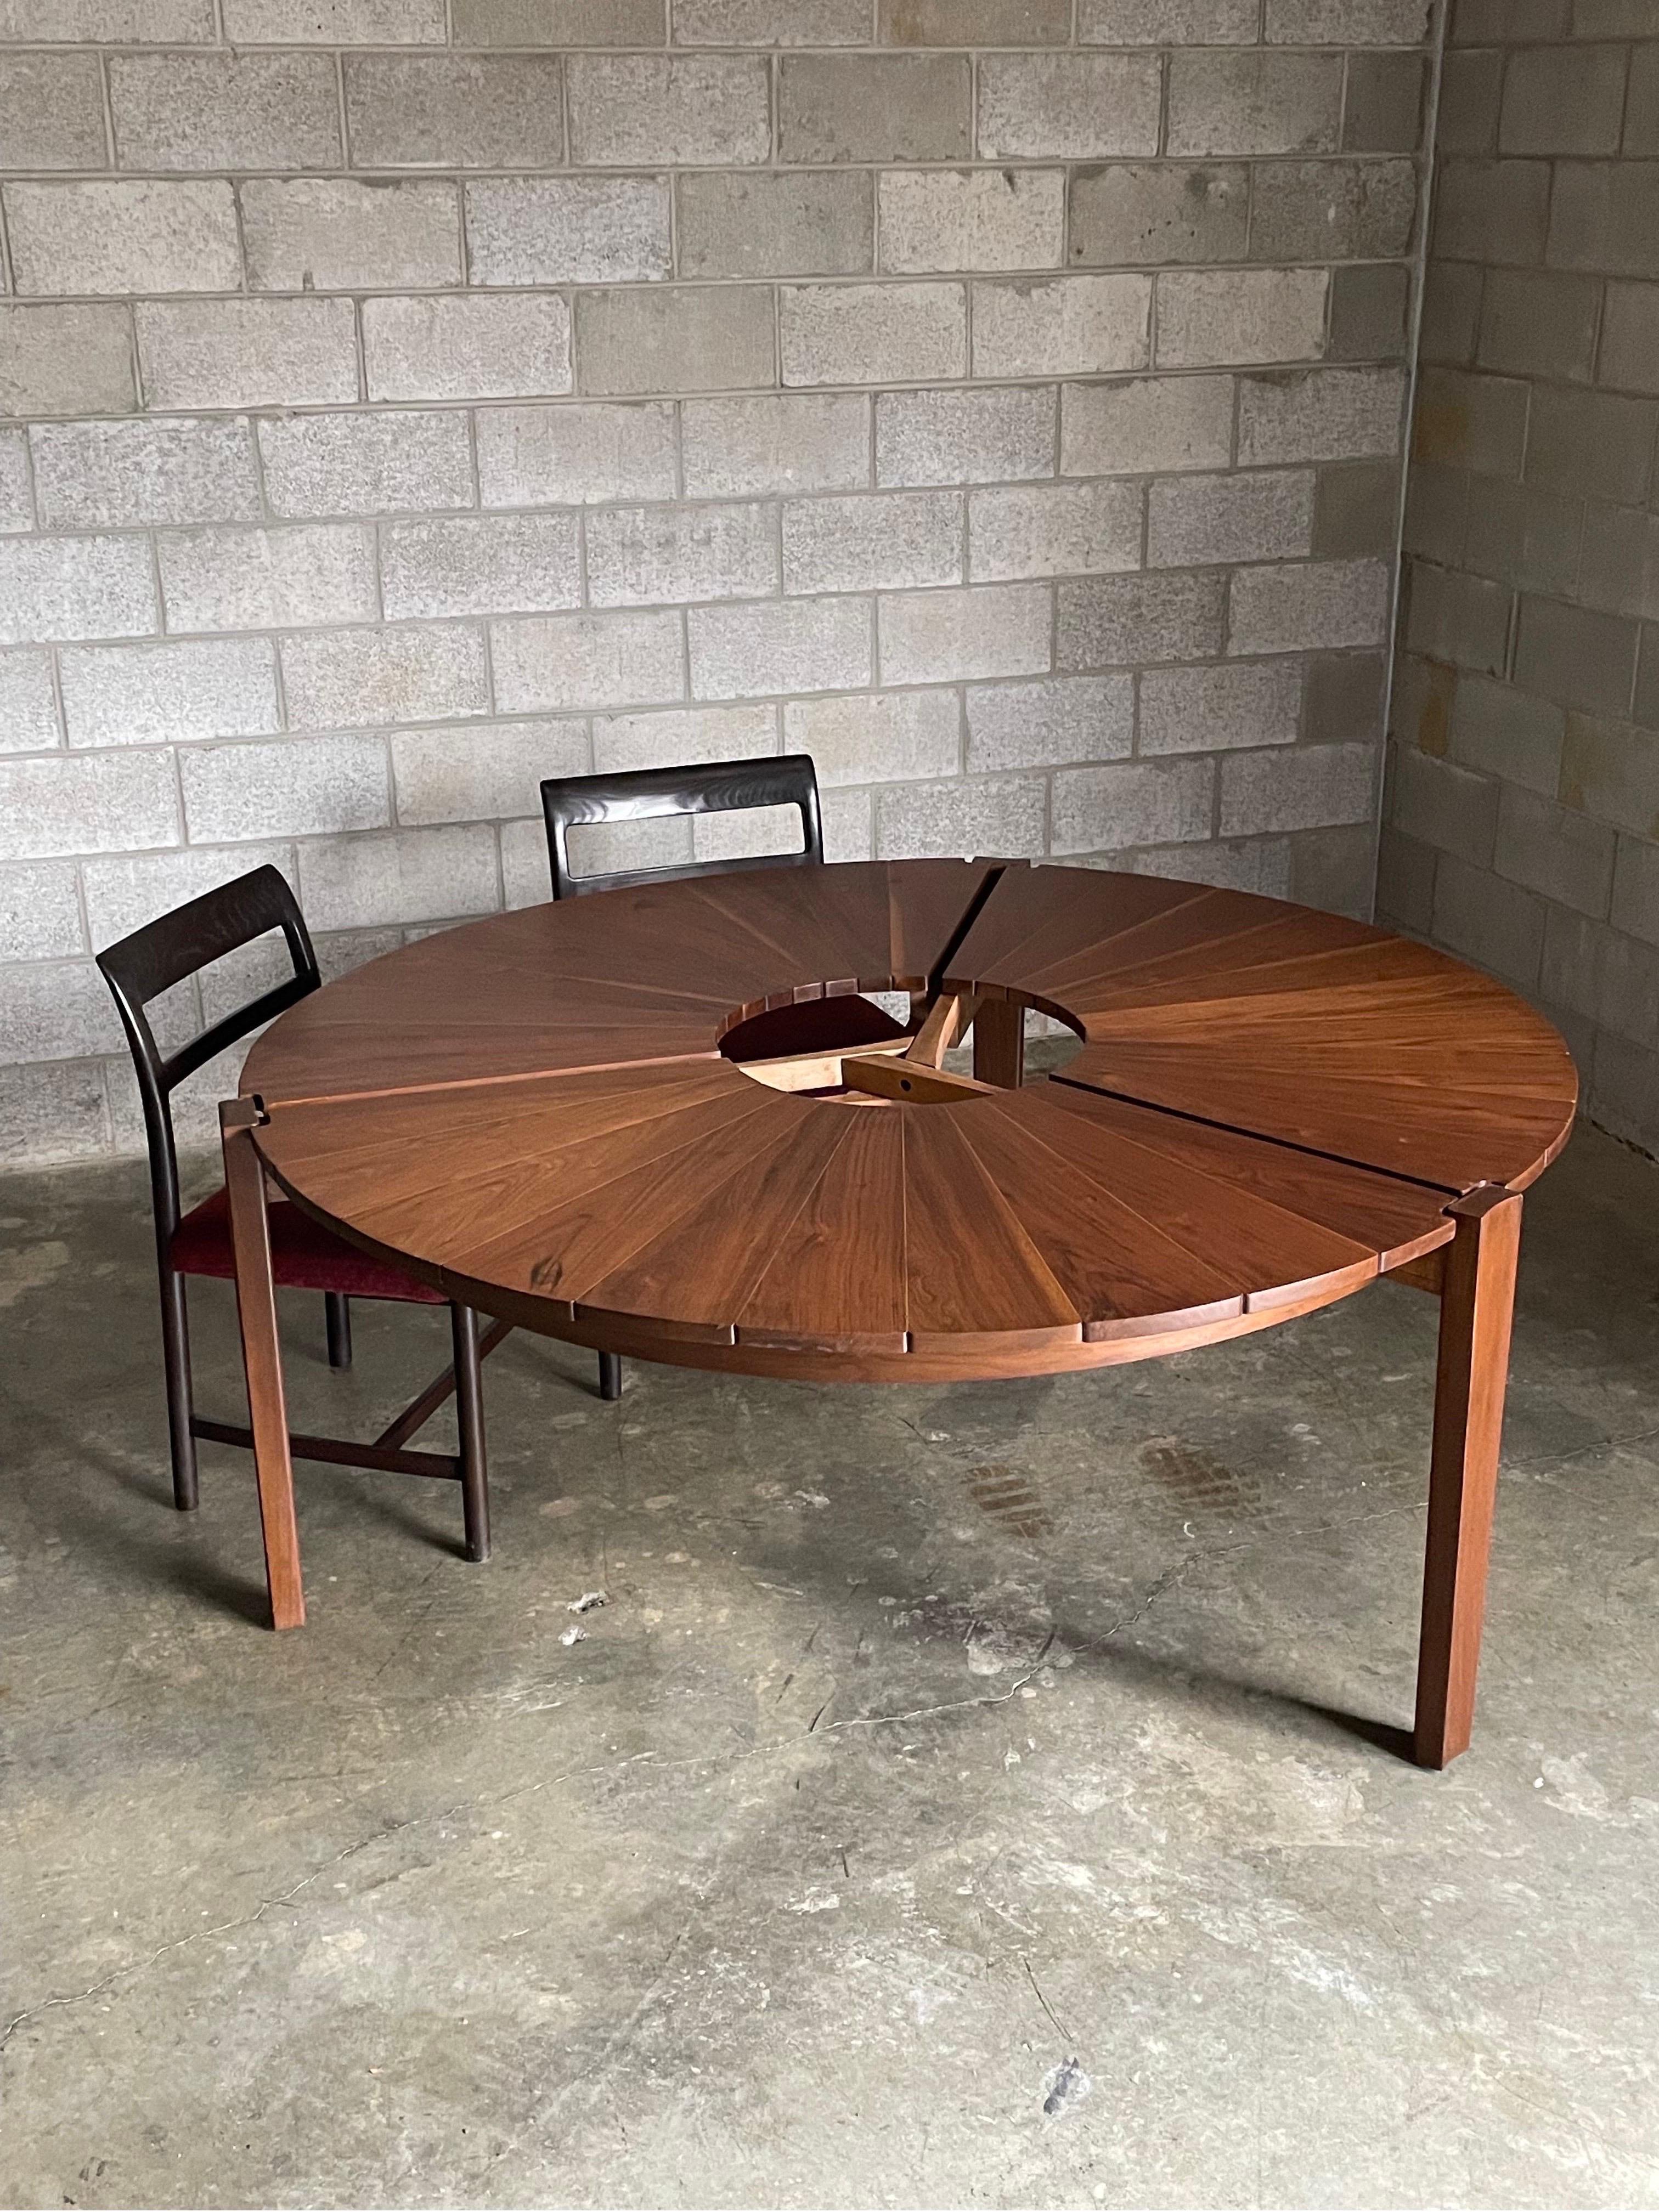 Studiocraft Round Petal Dining Table in Walnut and Maple, Charles Faucher 1975 1